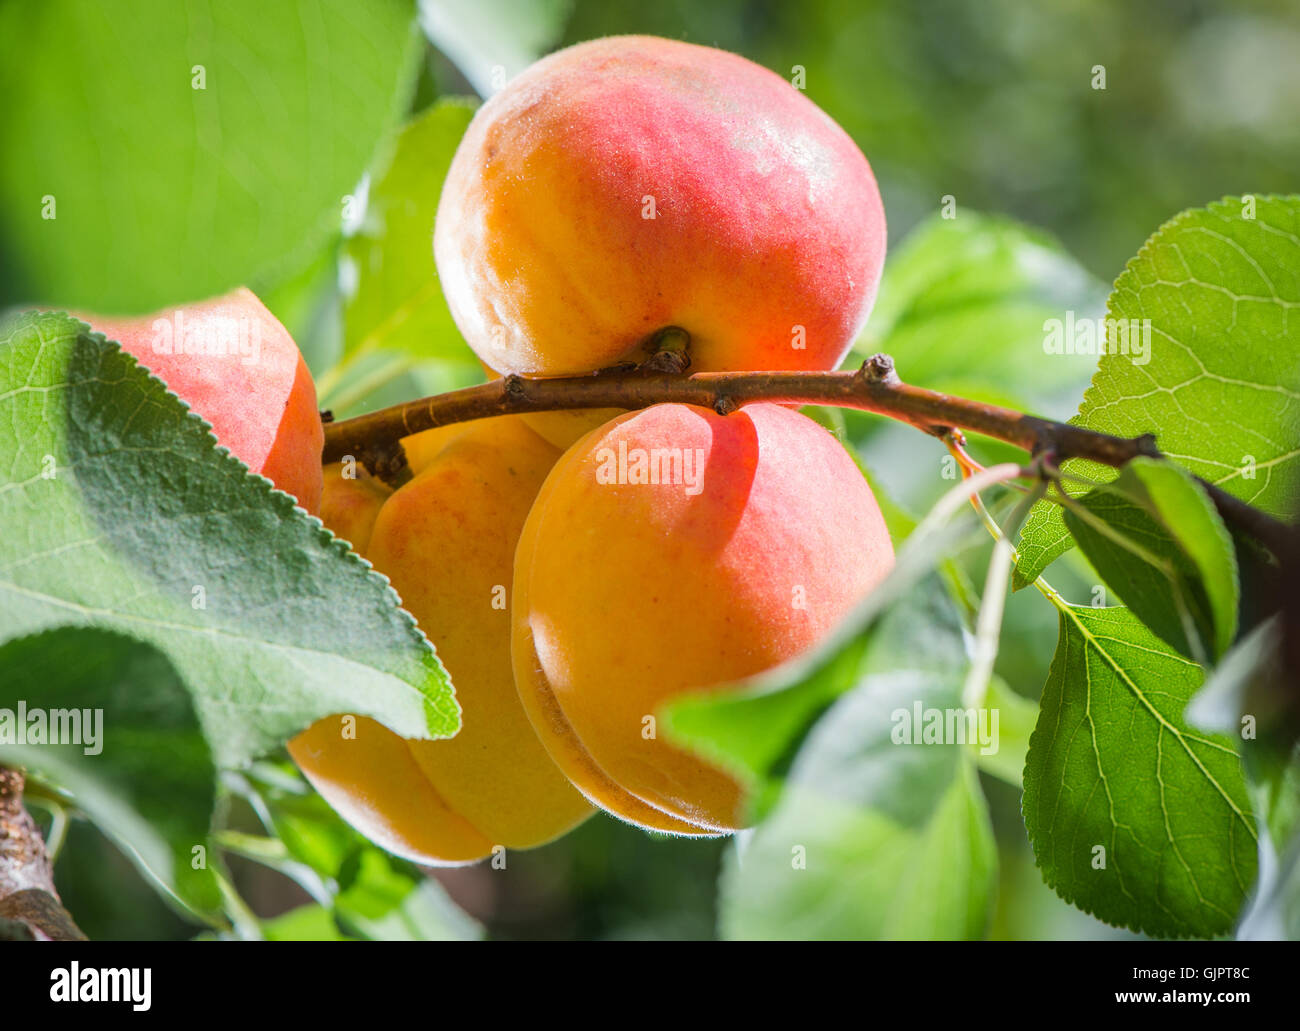 Ripe apricots on a tree branch Stock Photo